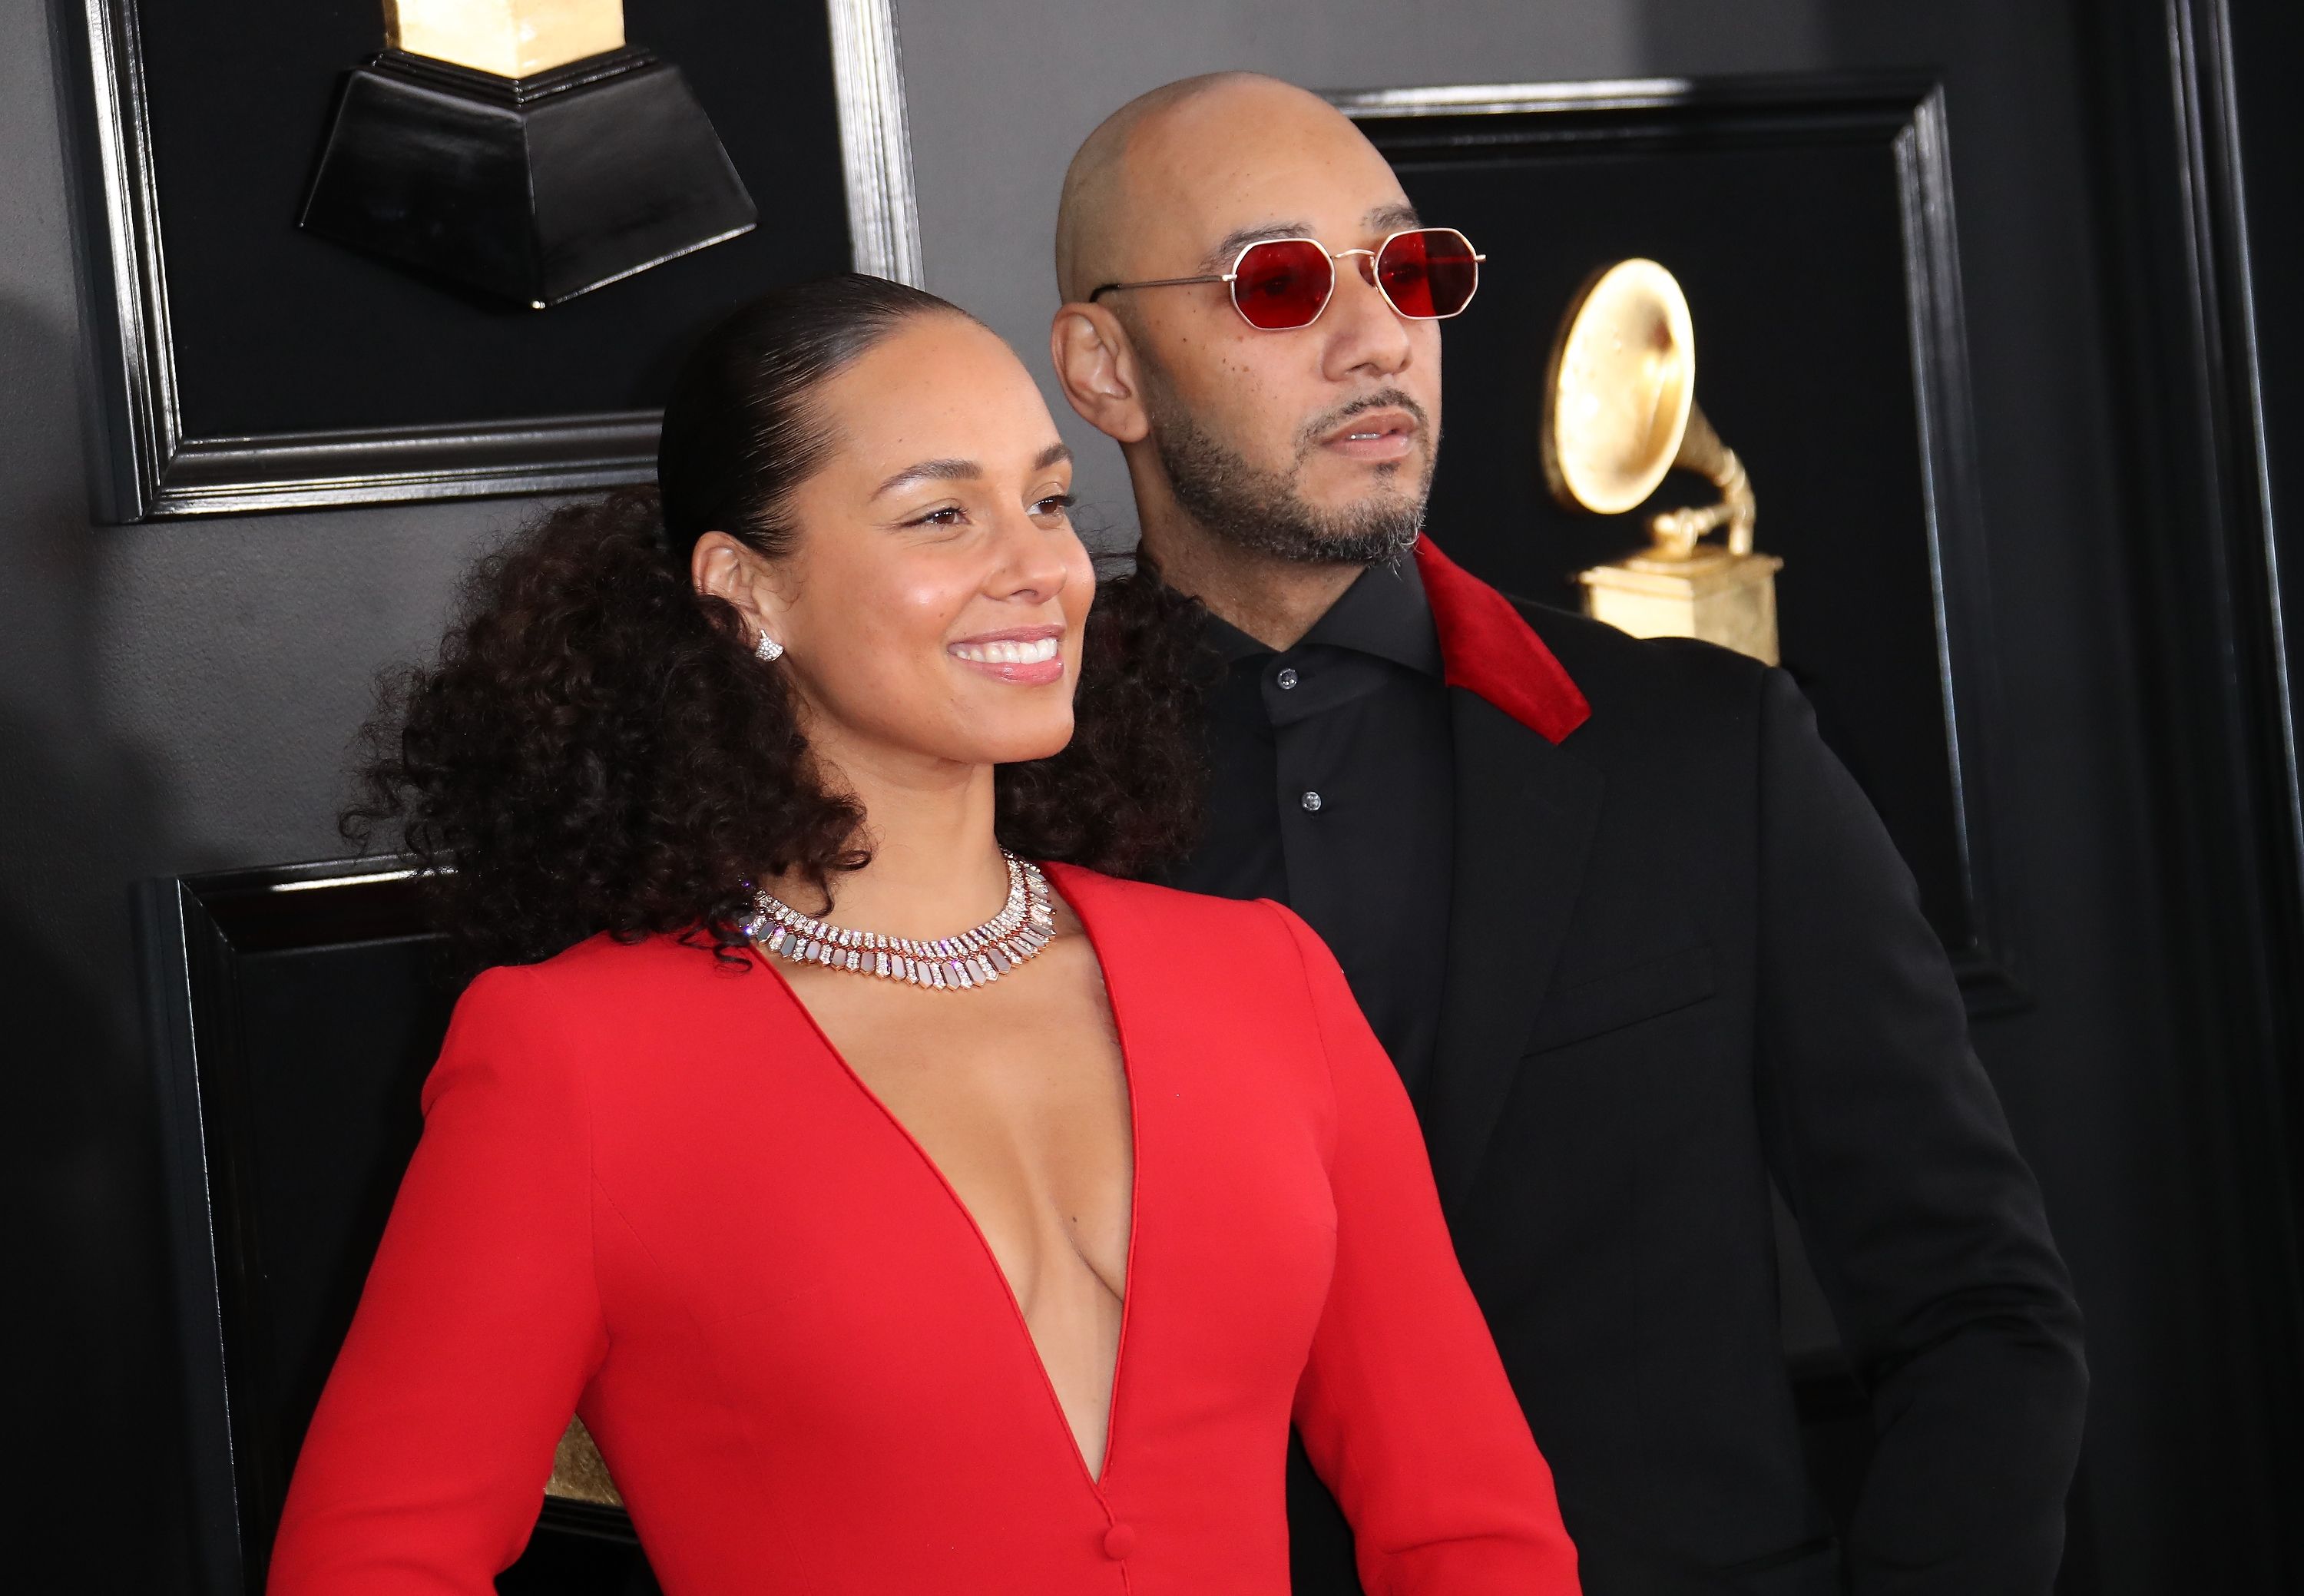 Alicia Keys and Swizz Beatz during the 61st Annual Grammy Awards at Staples Center on February 10, 2019 in Los Angeles, California. | Source: Getty Images